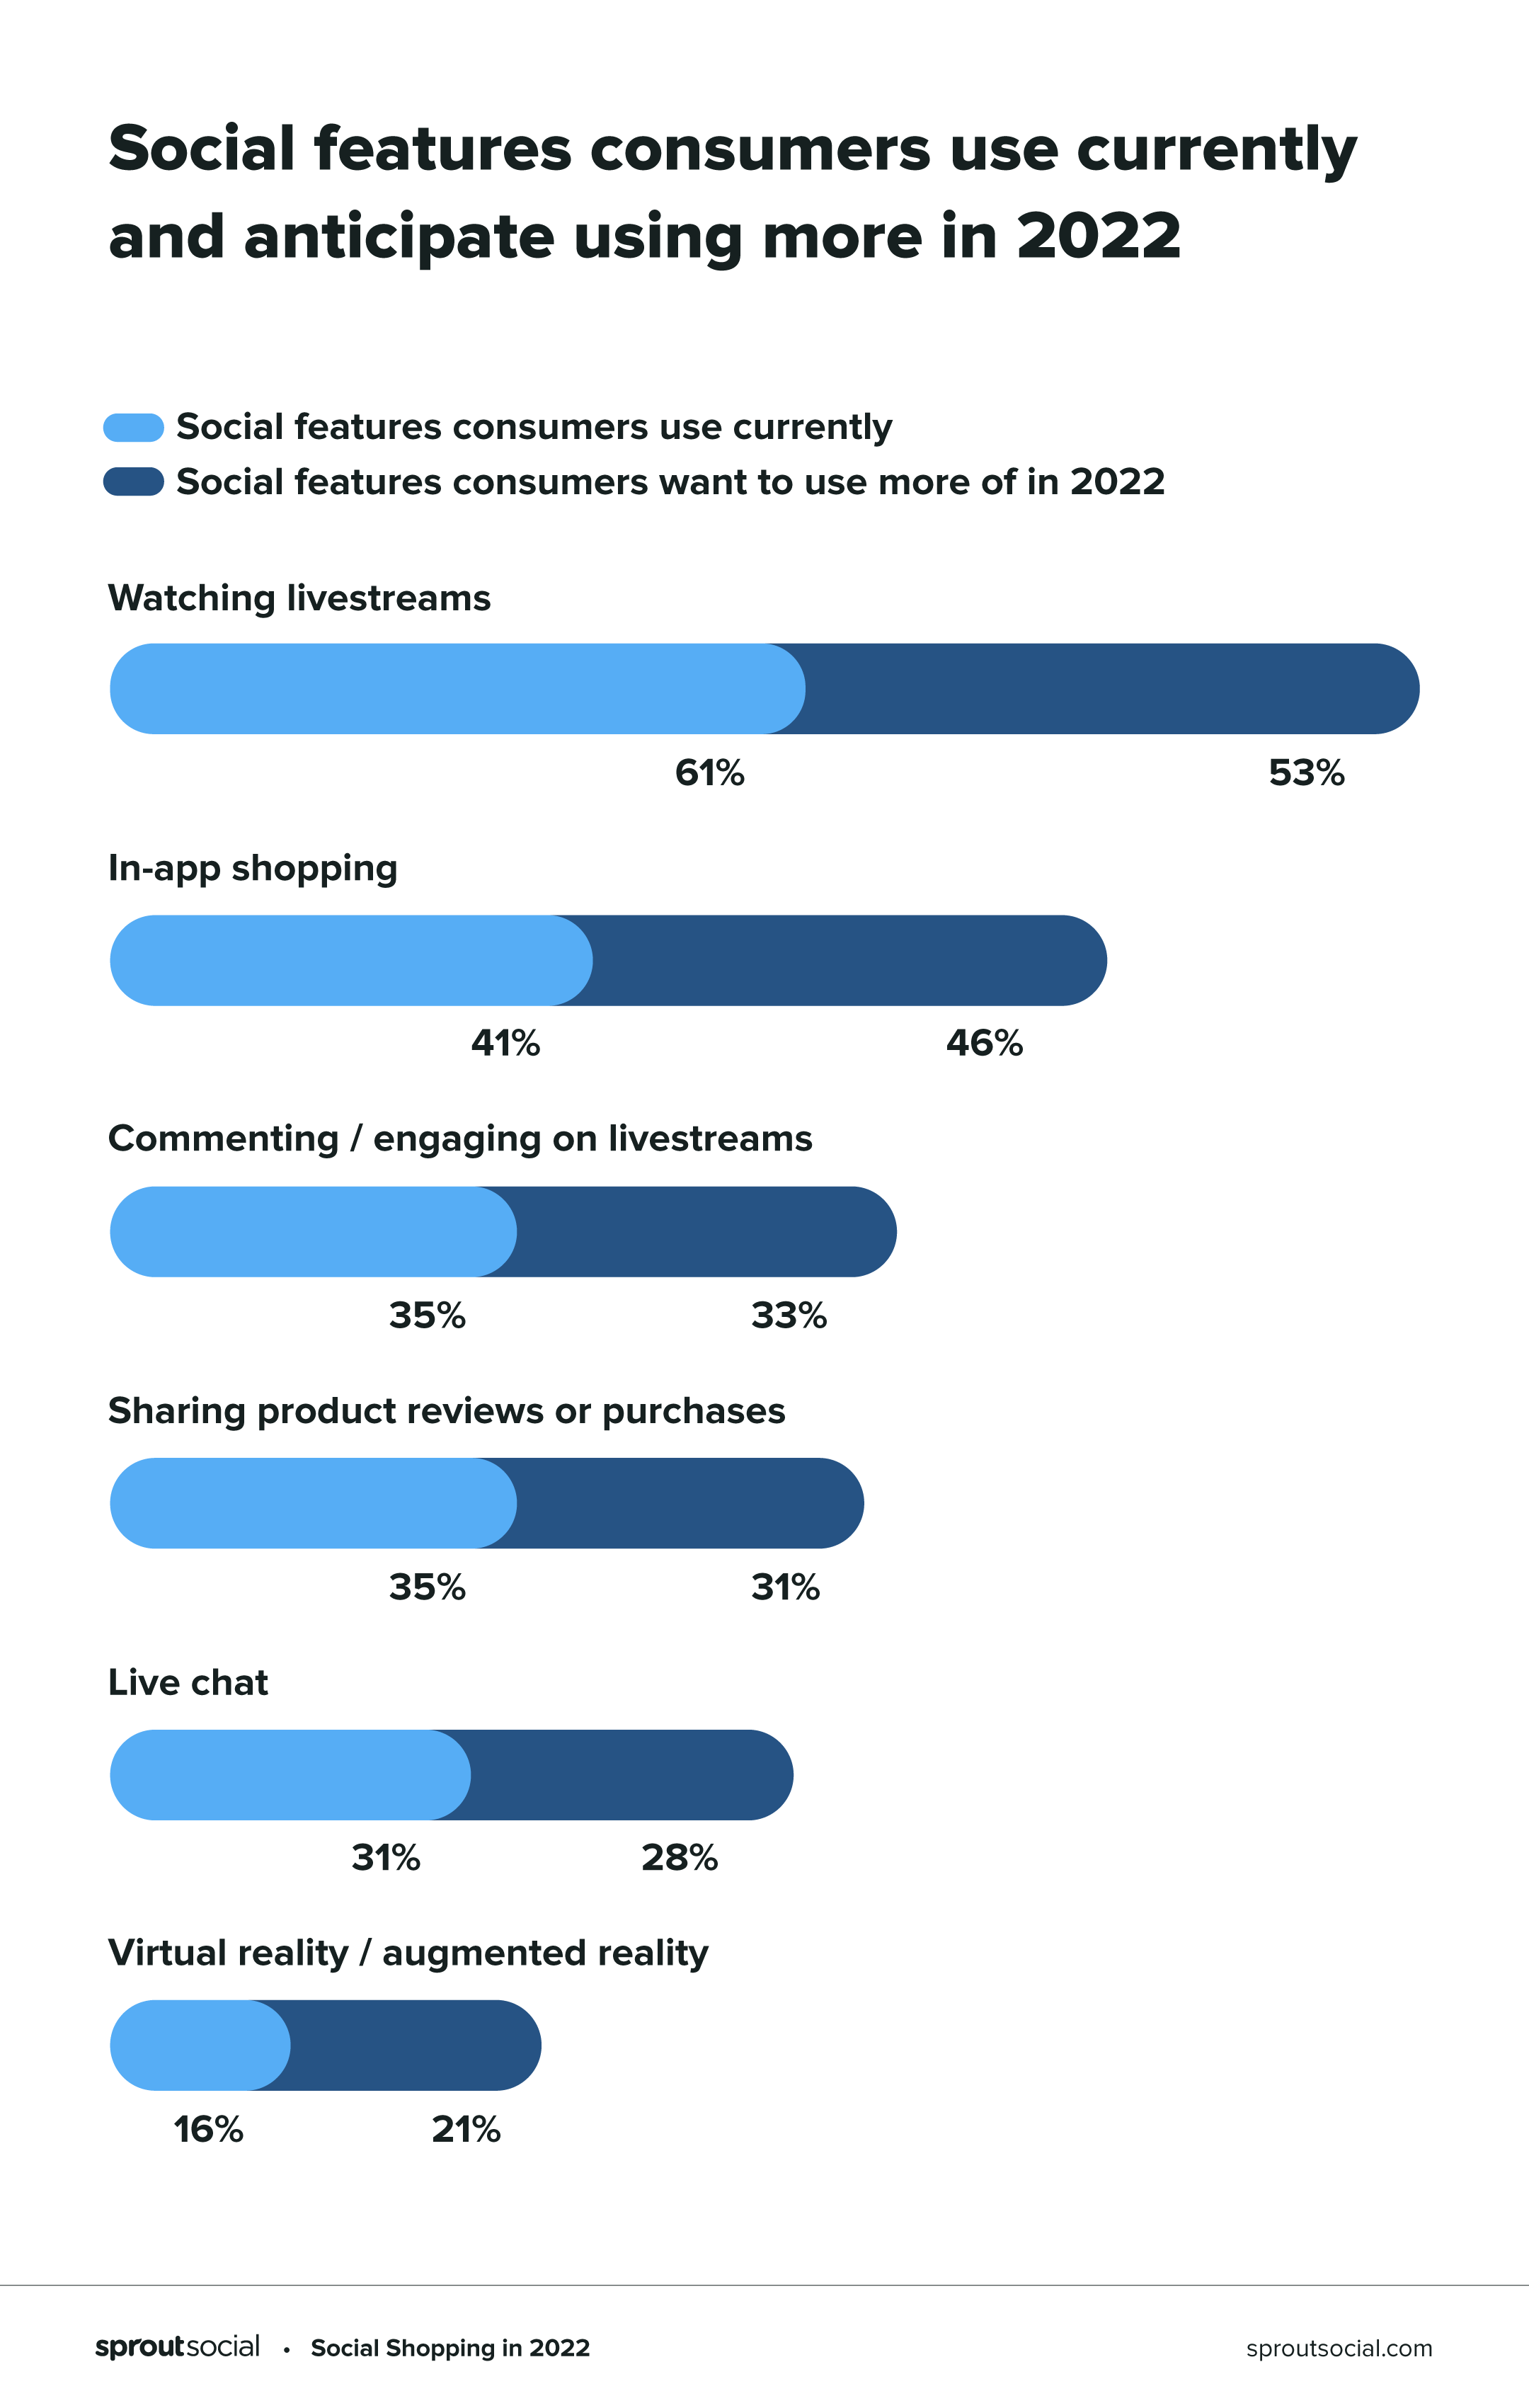 Chart showing which social features consumers use currently and anticipate using more in 2022